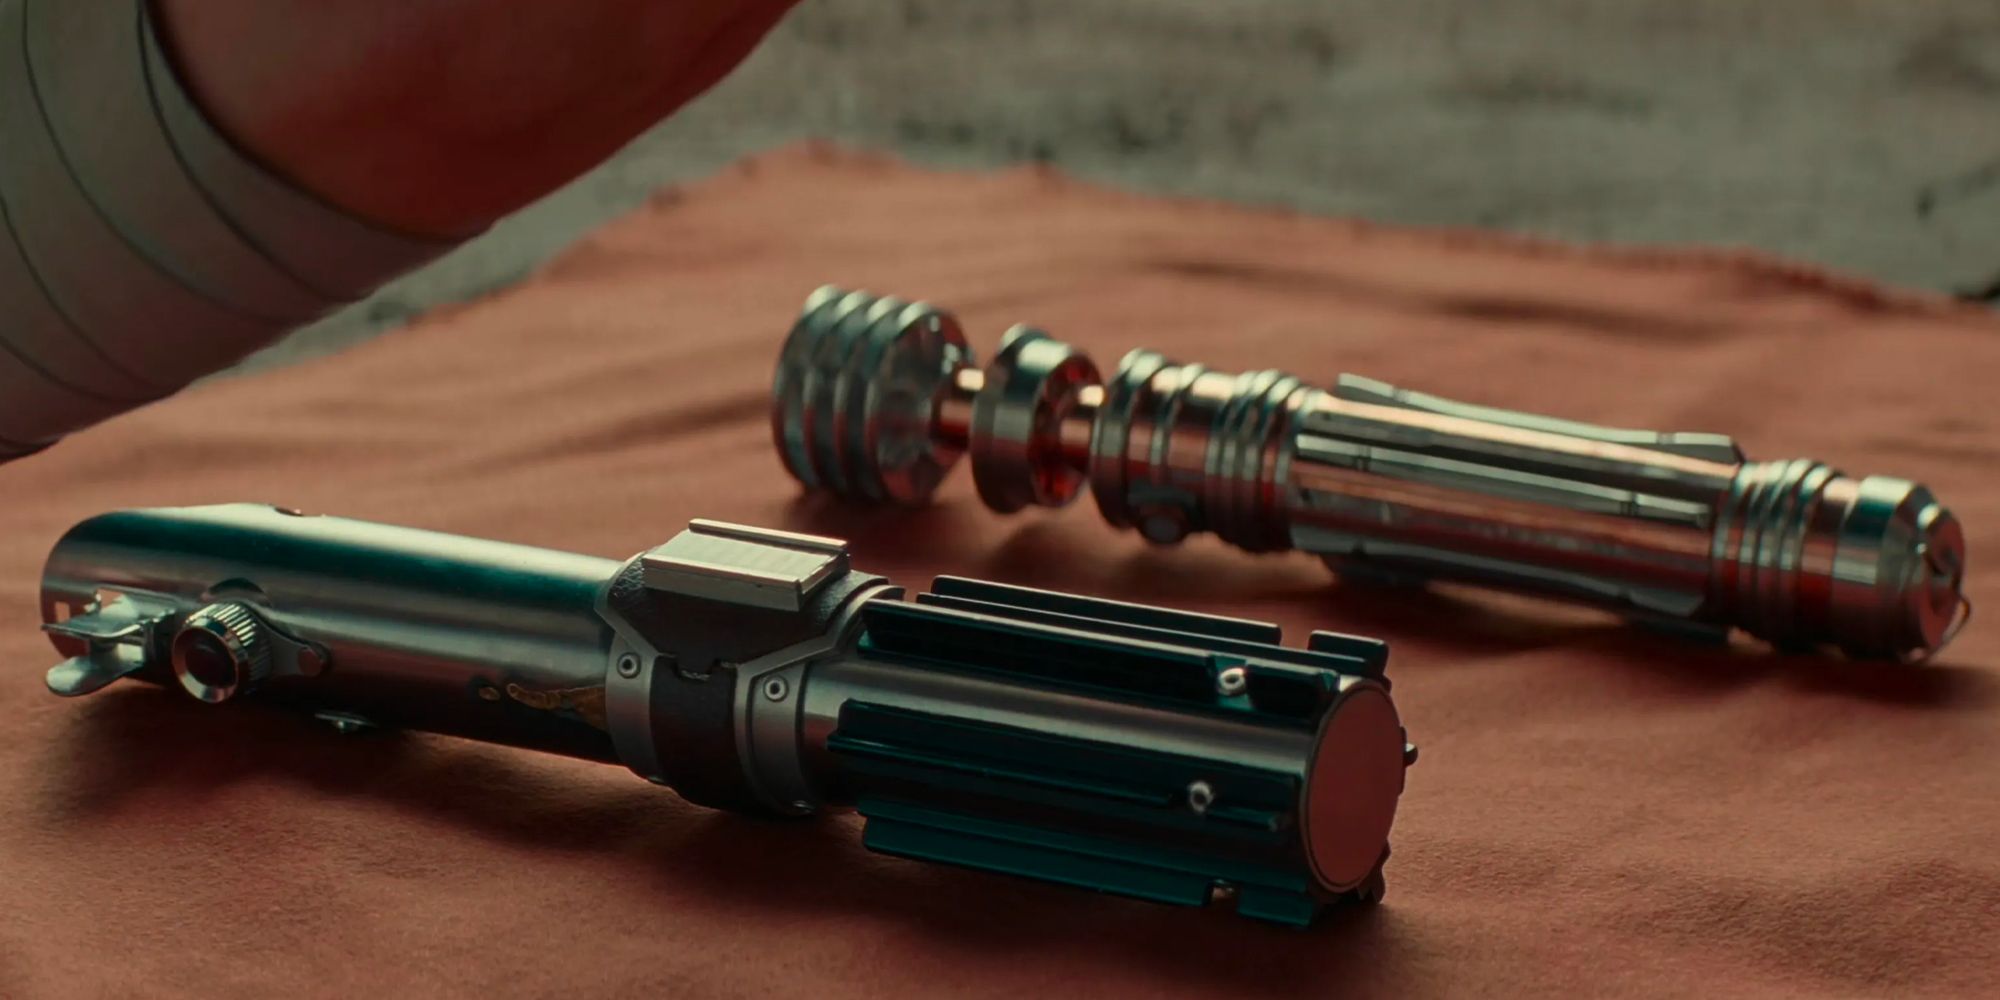 Luke and Anakin Skywalker's lightsabers laying on a cloth in The Rise of Skywalker as Rey is about to bury them on Tatooine